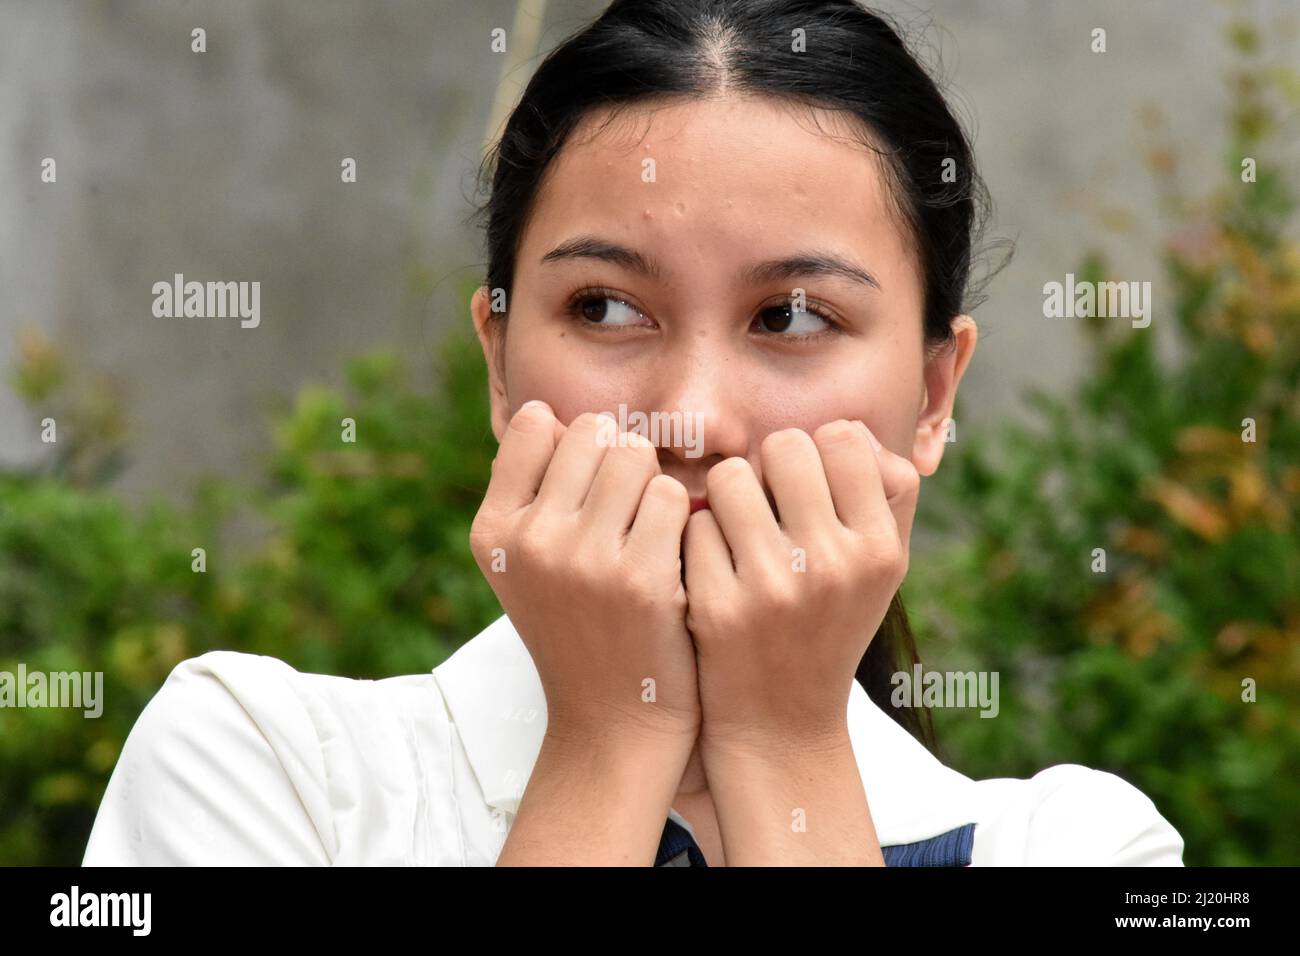 A Shy Or Fearful Asian Woman Stock Photo